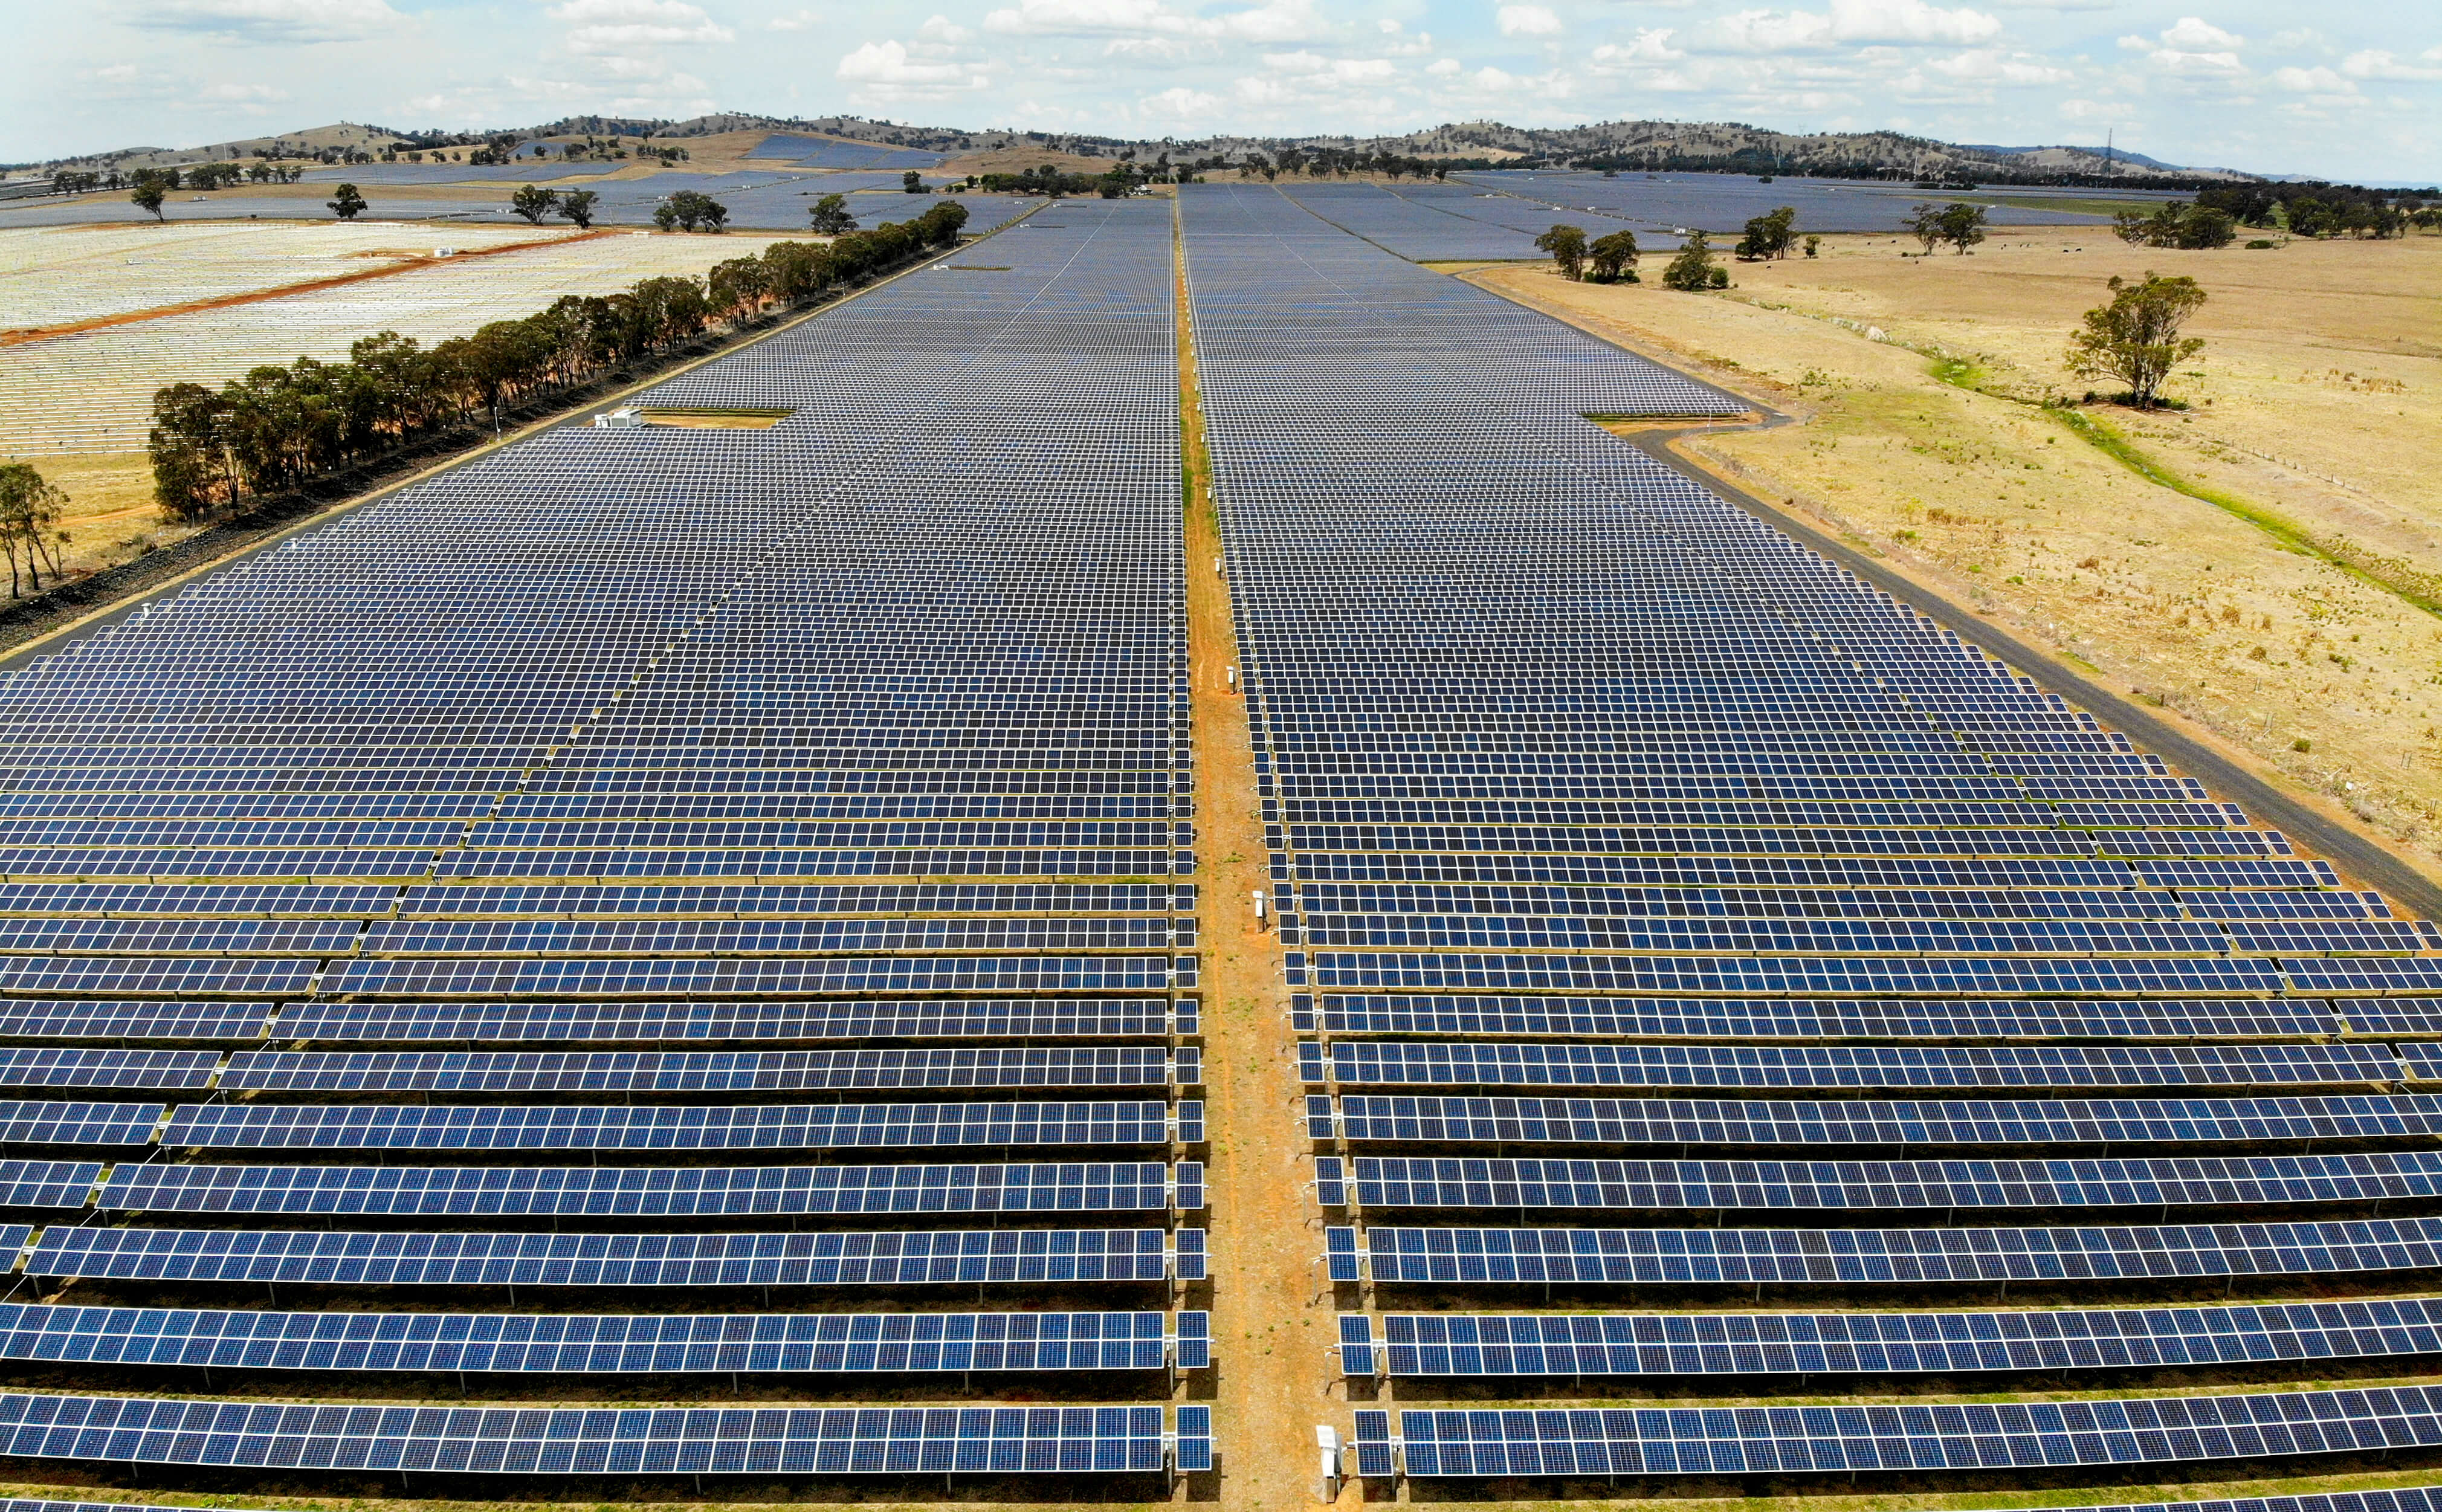 Large-scale solar farm in the Central-West Orana Renewable Energy Zone